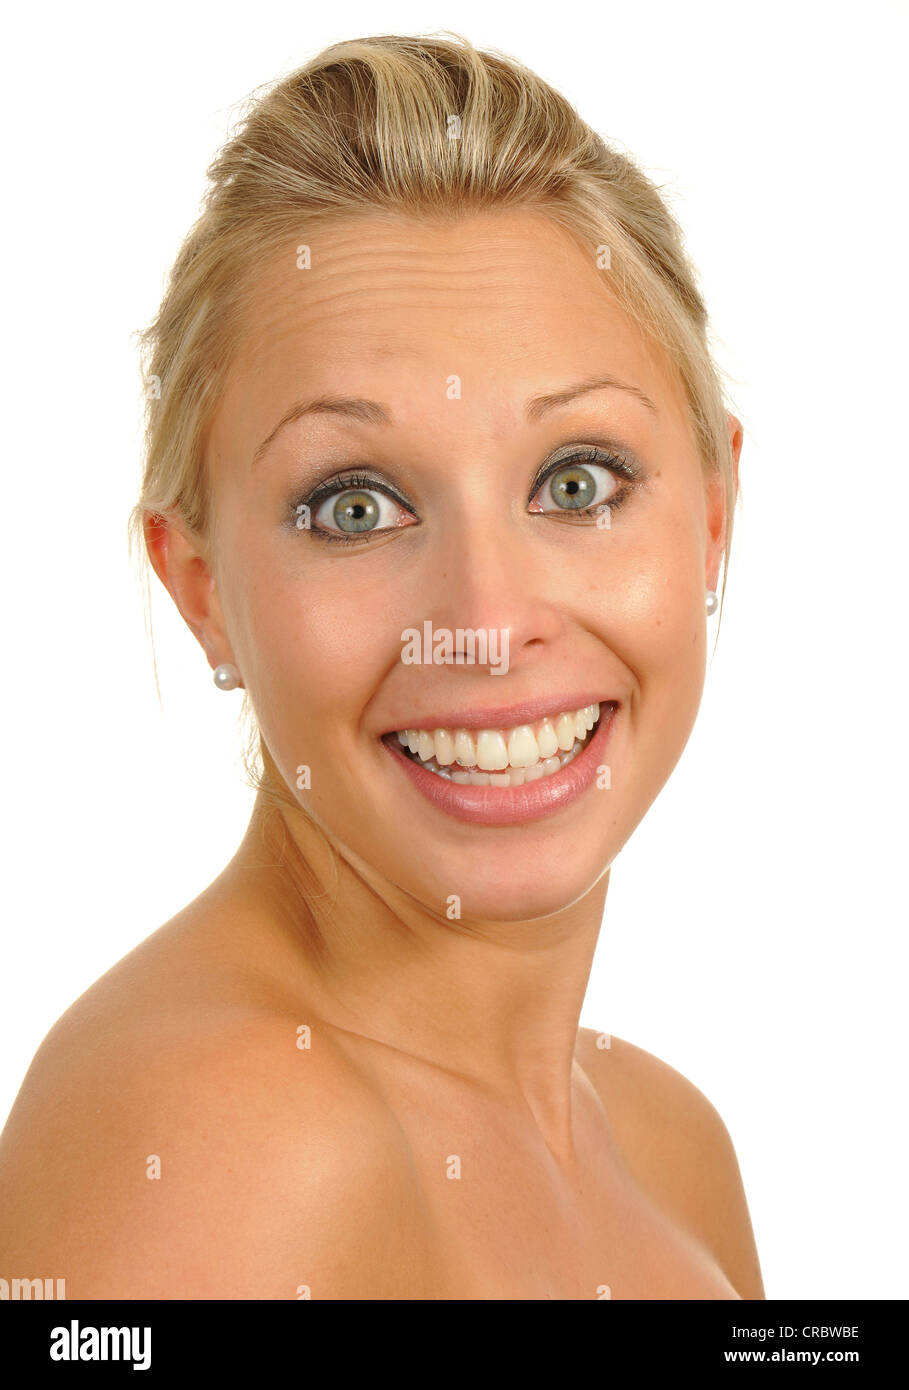 Young woman, positively surprised, portrait Stock Photo